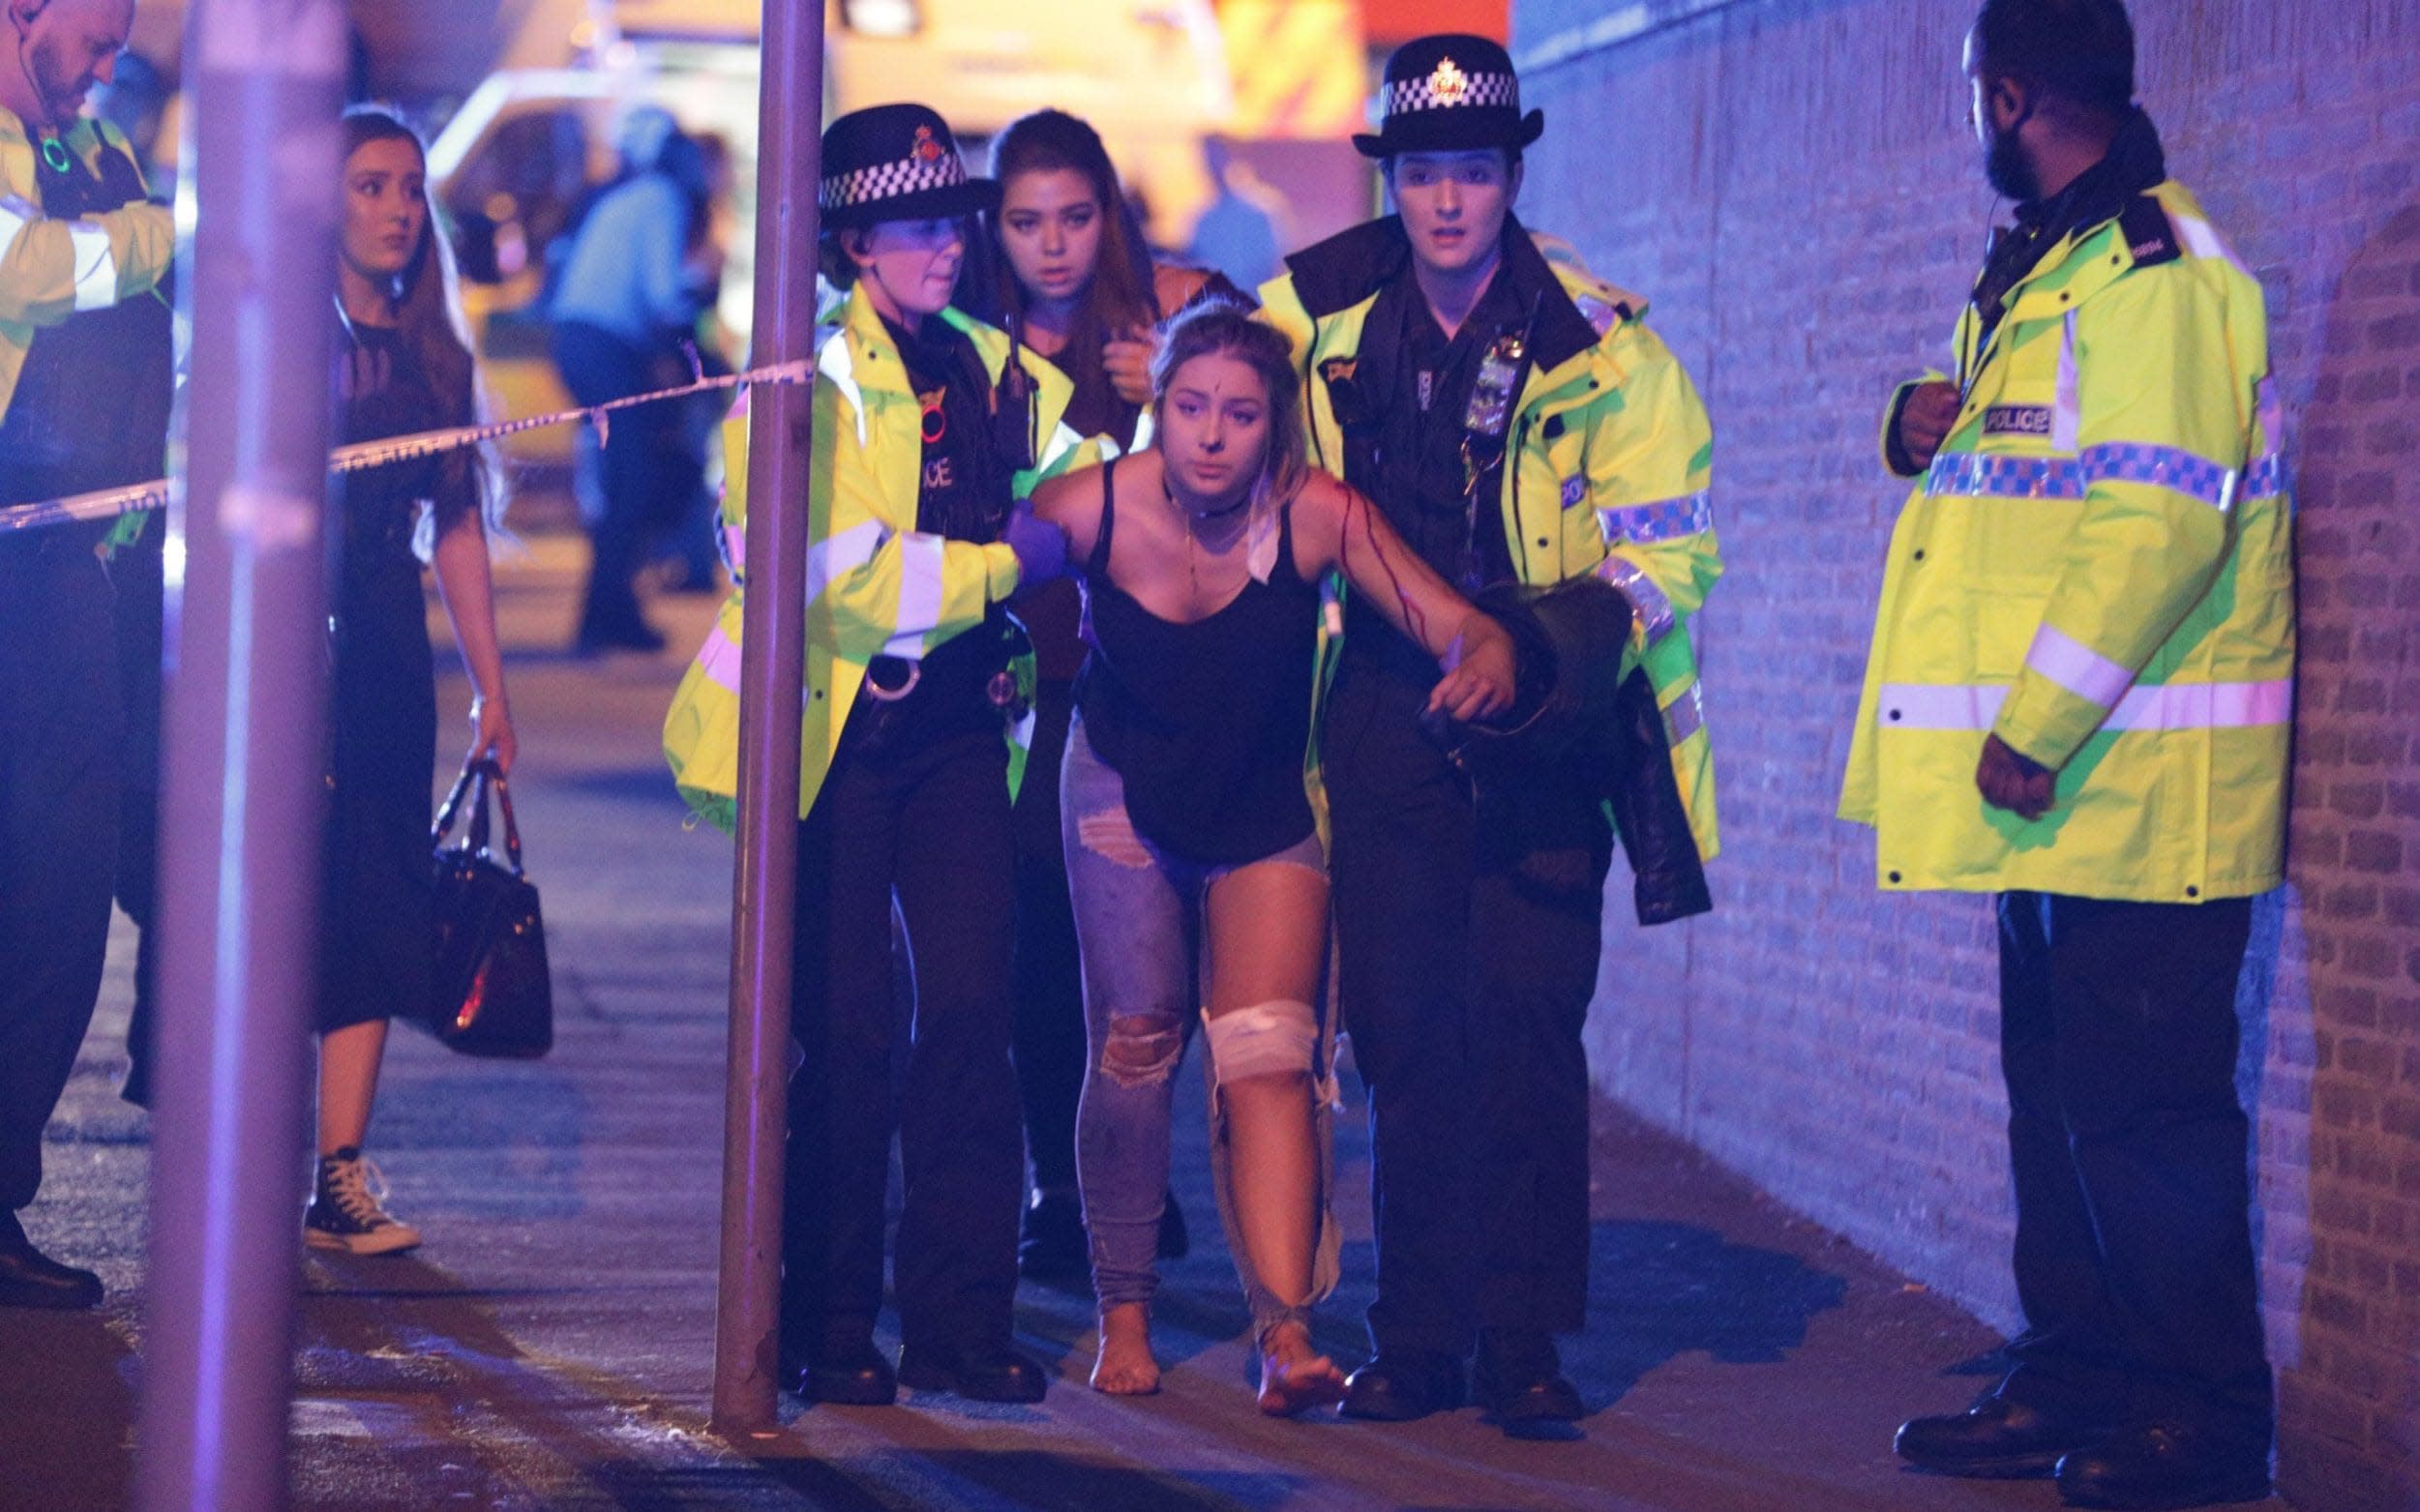 Manchester Arena explosion: Children among 22 killed by suicide bomber after Ariana Grande concert